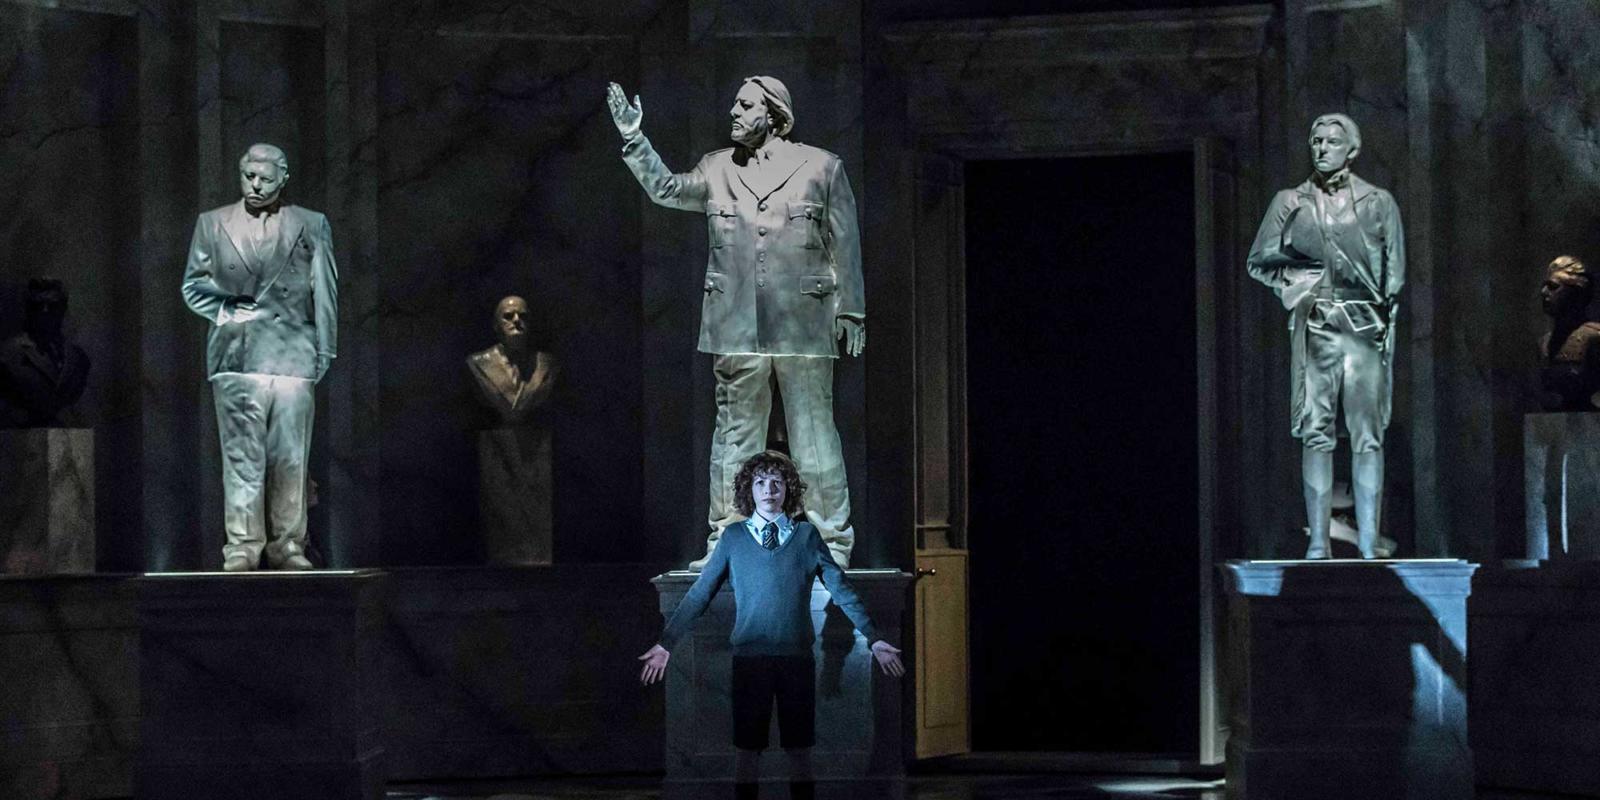 Young boy with curly hair standing in front of 3 statues in ENO's The Winter's Tale